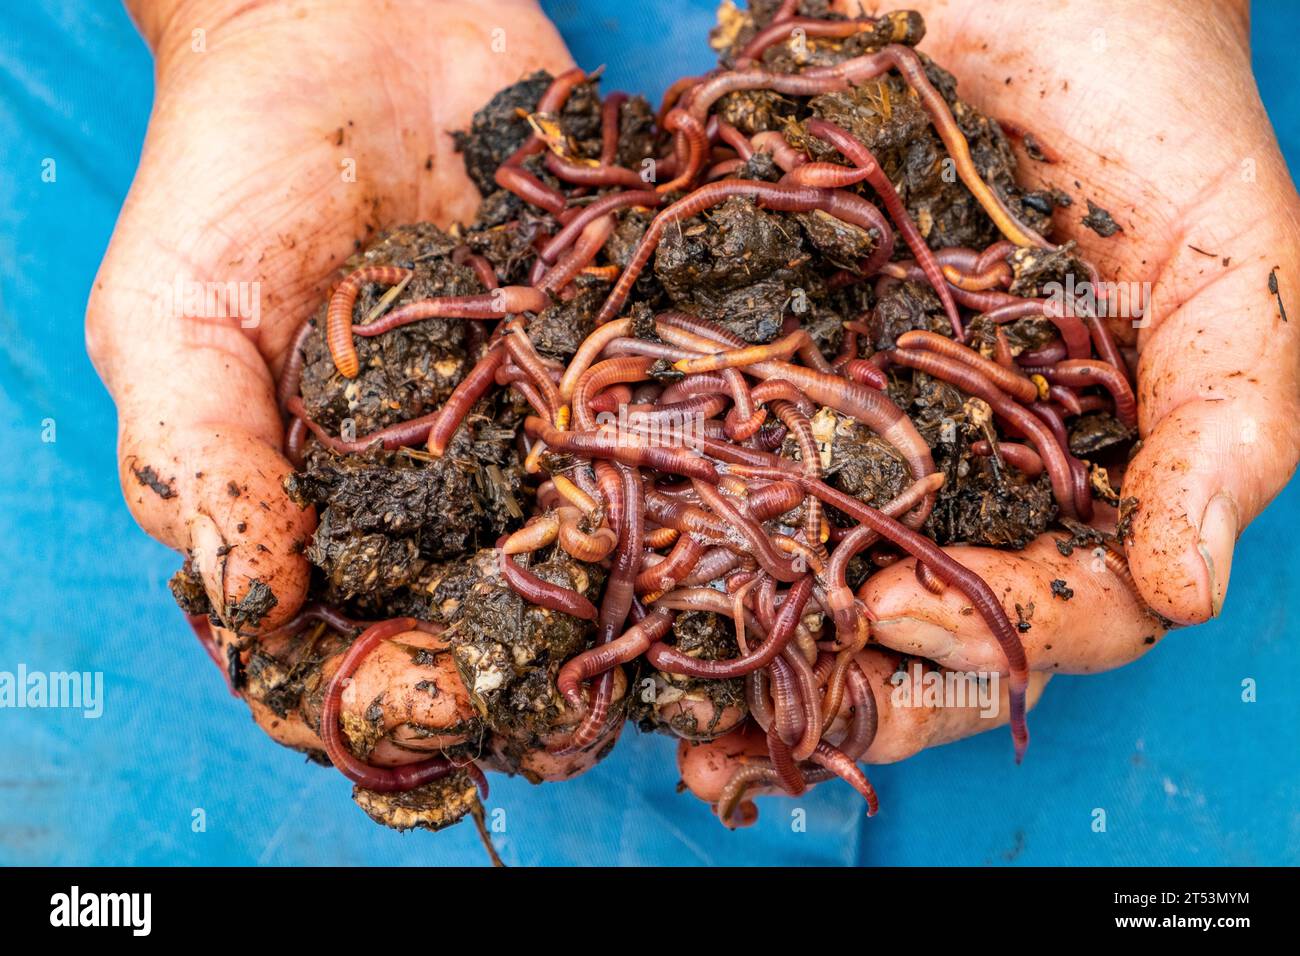 Vermiculture in organic gardening. A gardener with two hands full of compost worms. Stock Photo